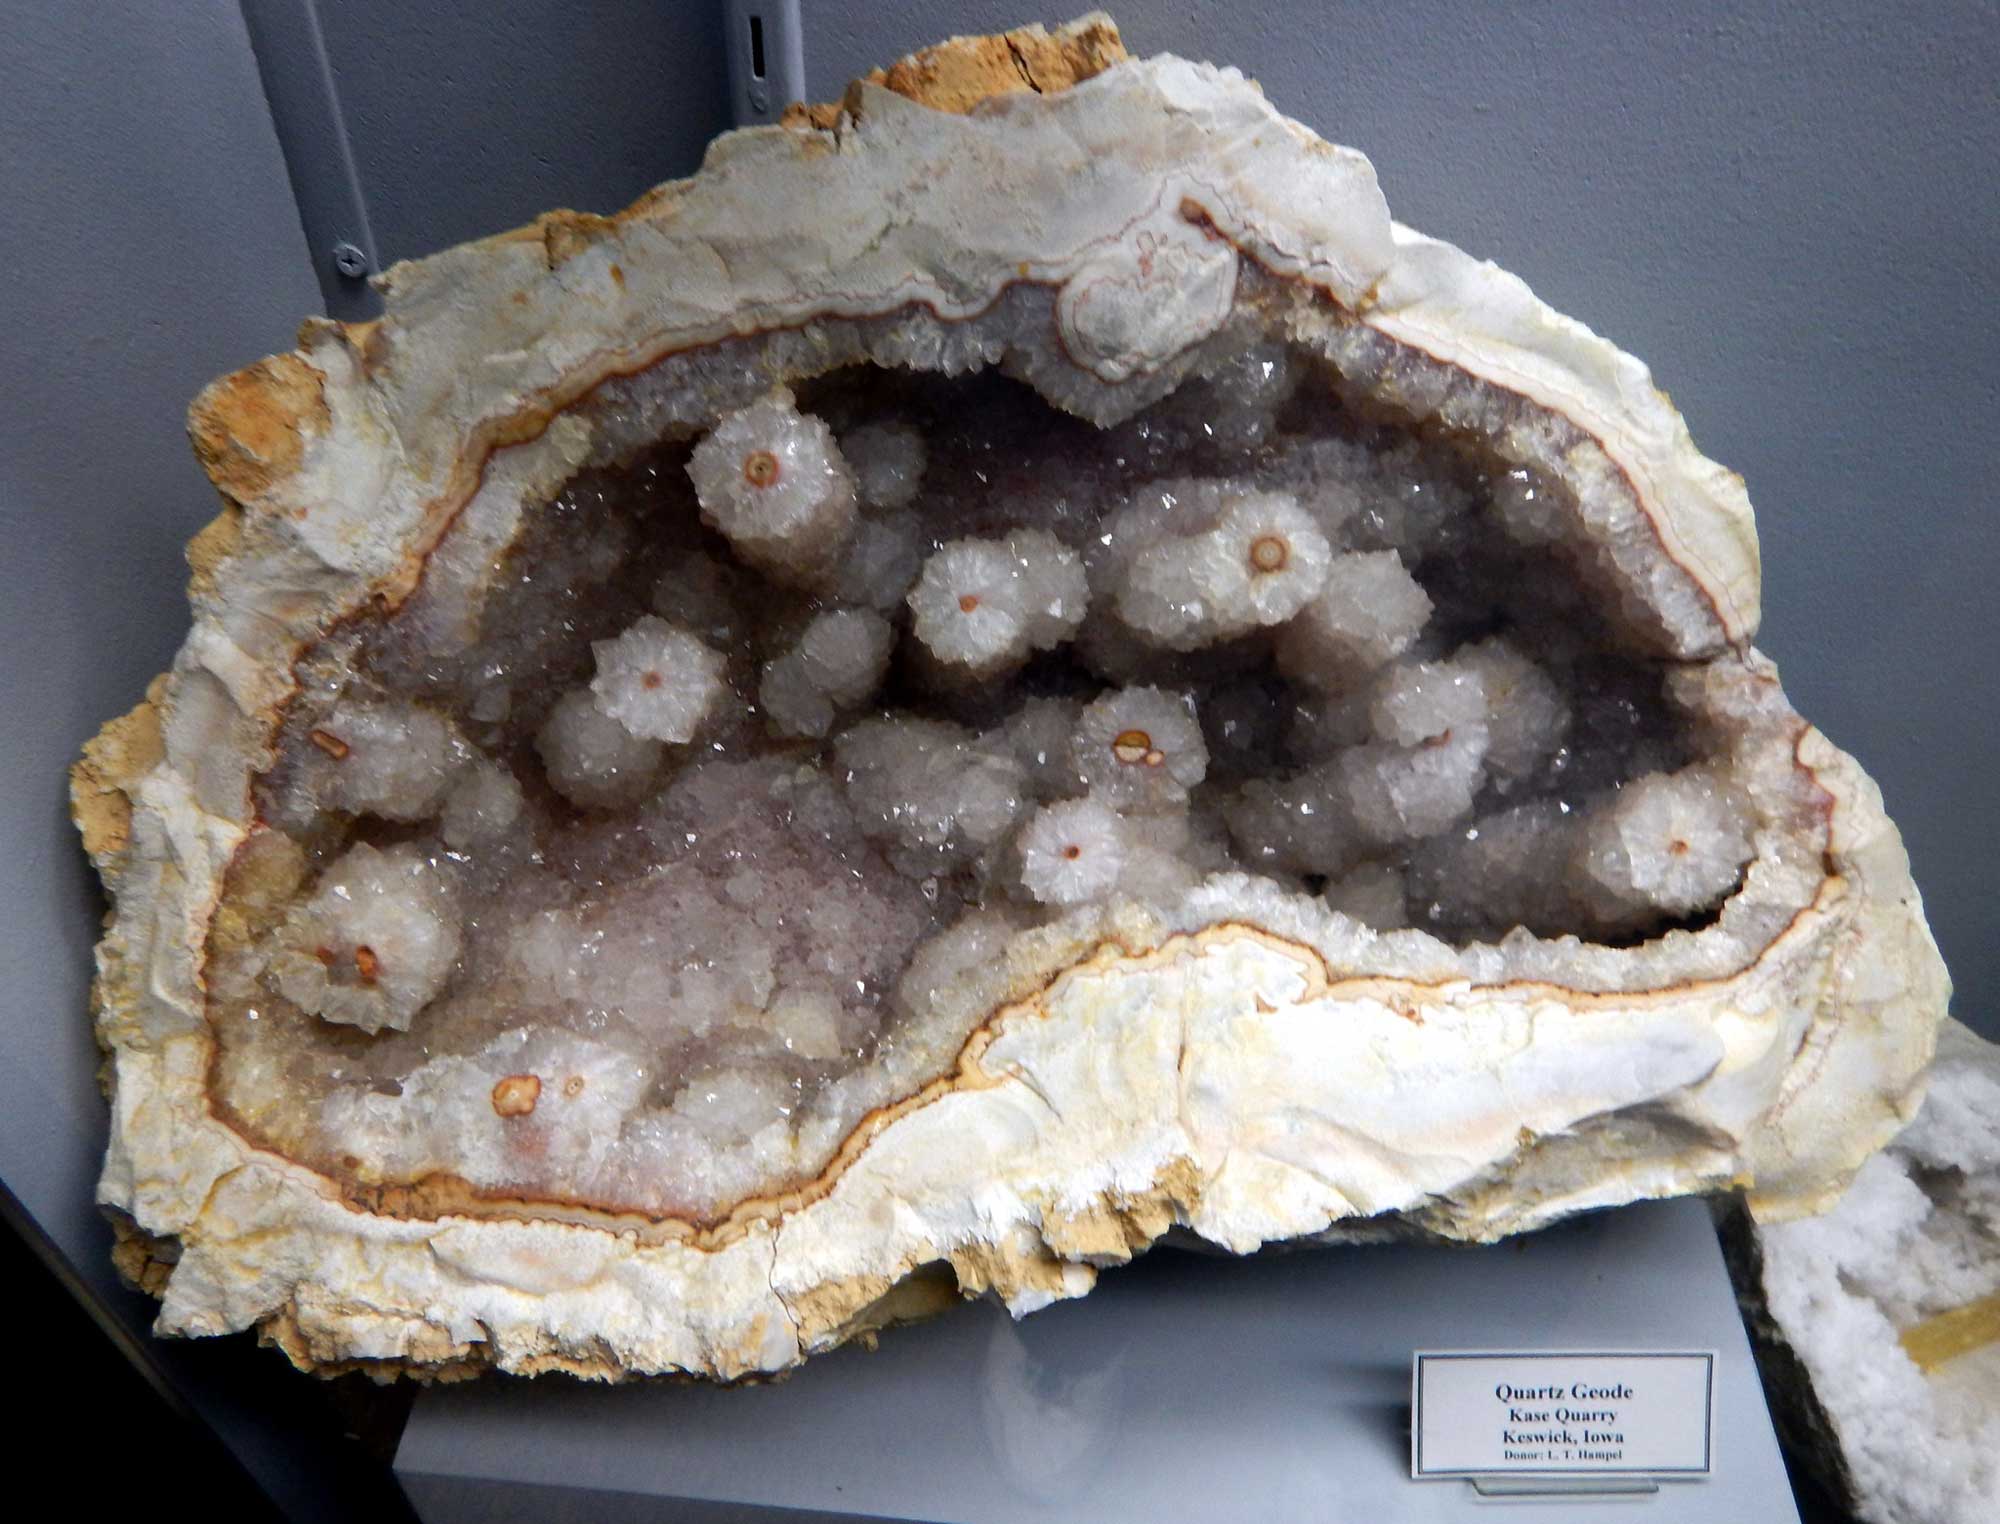 Photograph of a large geode from Iowa.